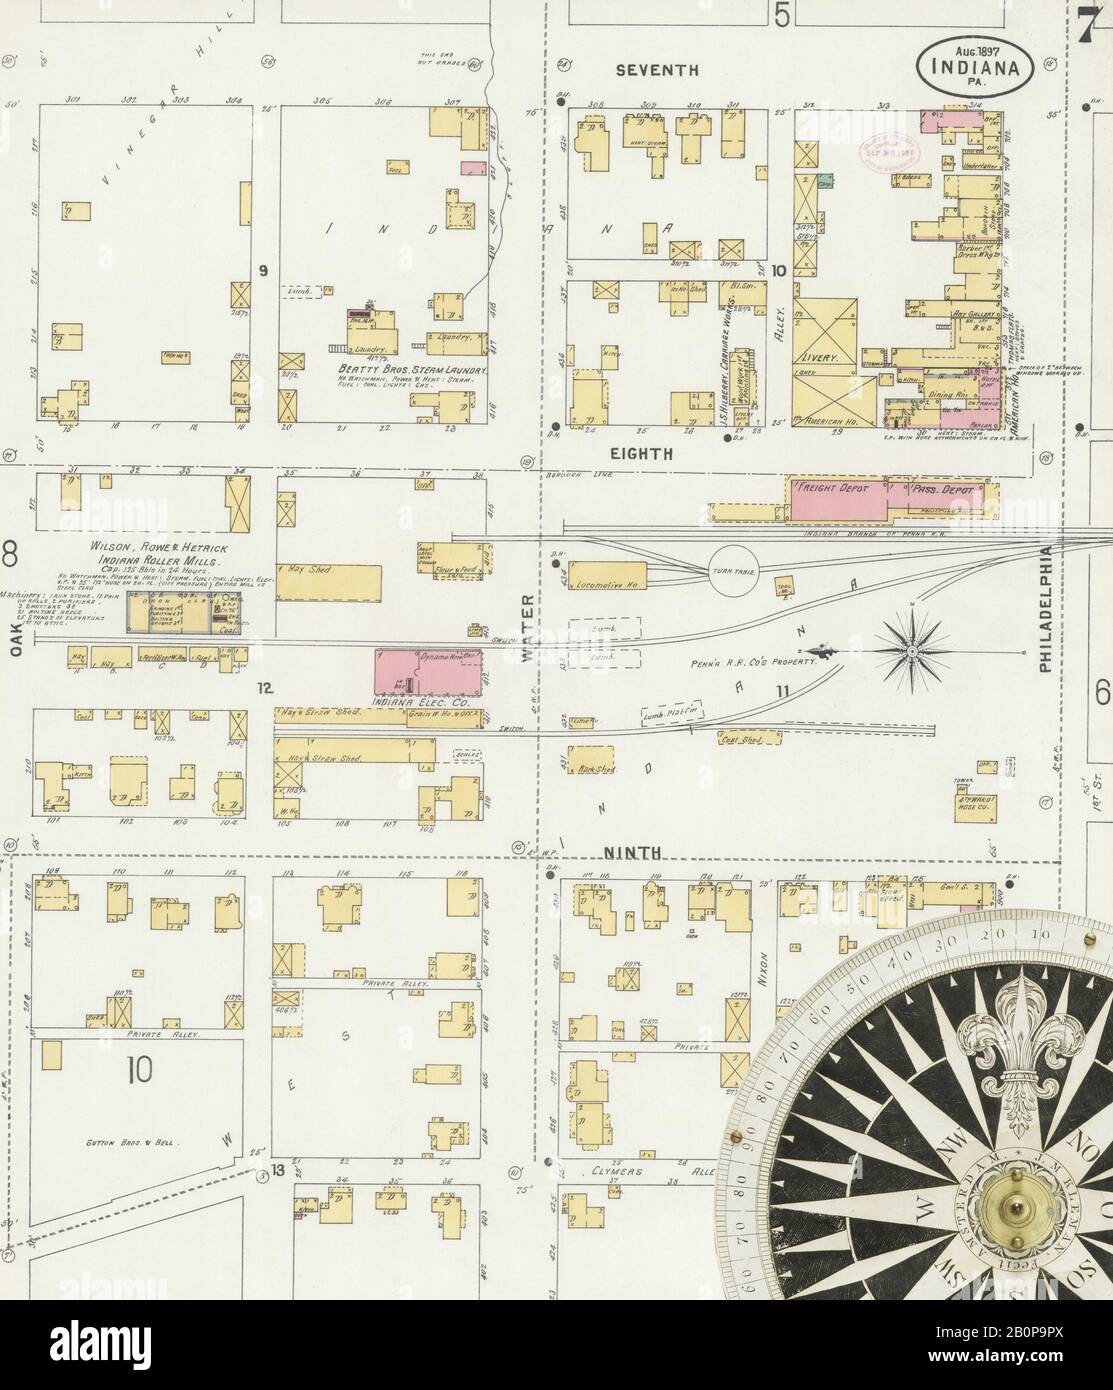 Image 7 of Sanborn Fire Insurance Map from Indiana, Indiana County, Pennsylvania. Aug 1897. 13 Sheet(s), America, street map with a Nineteenth Century compass Stock Photo